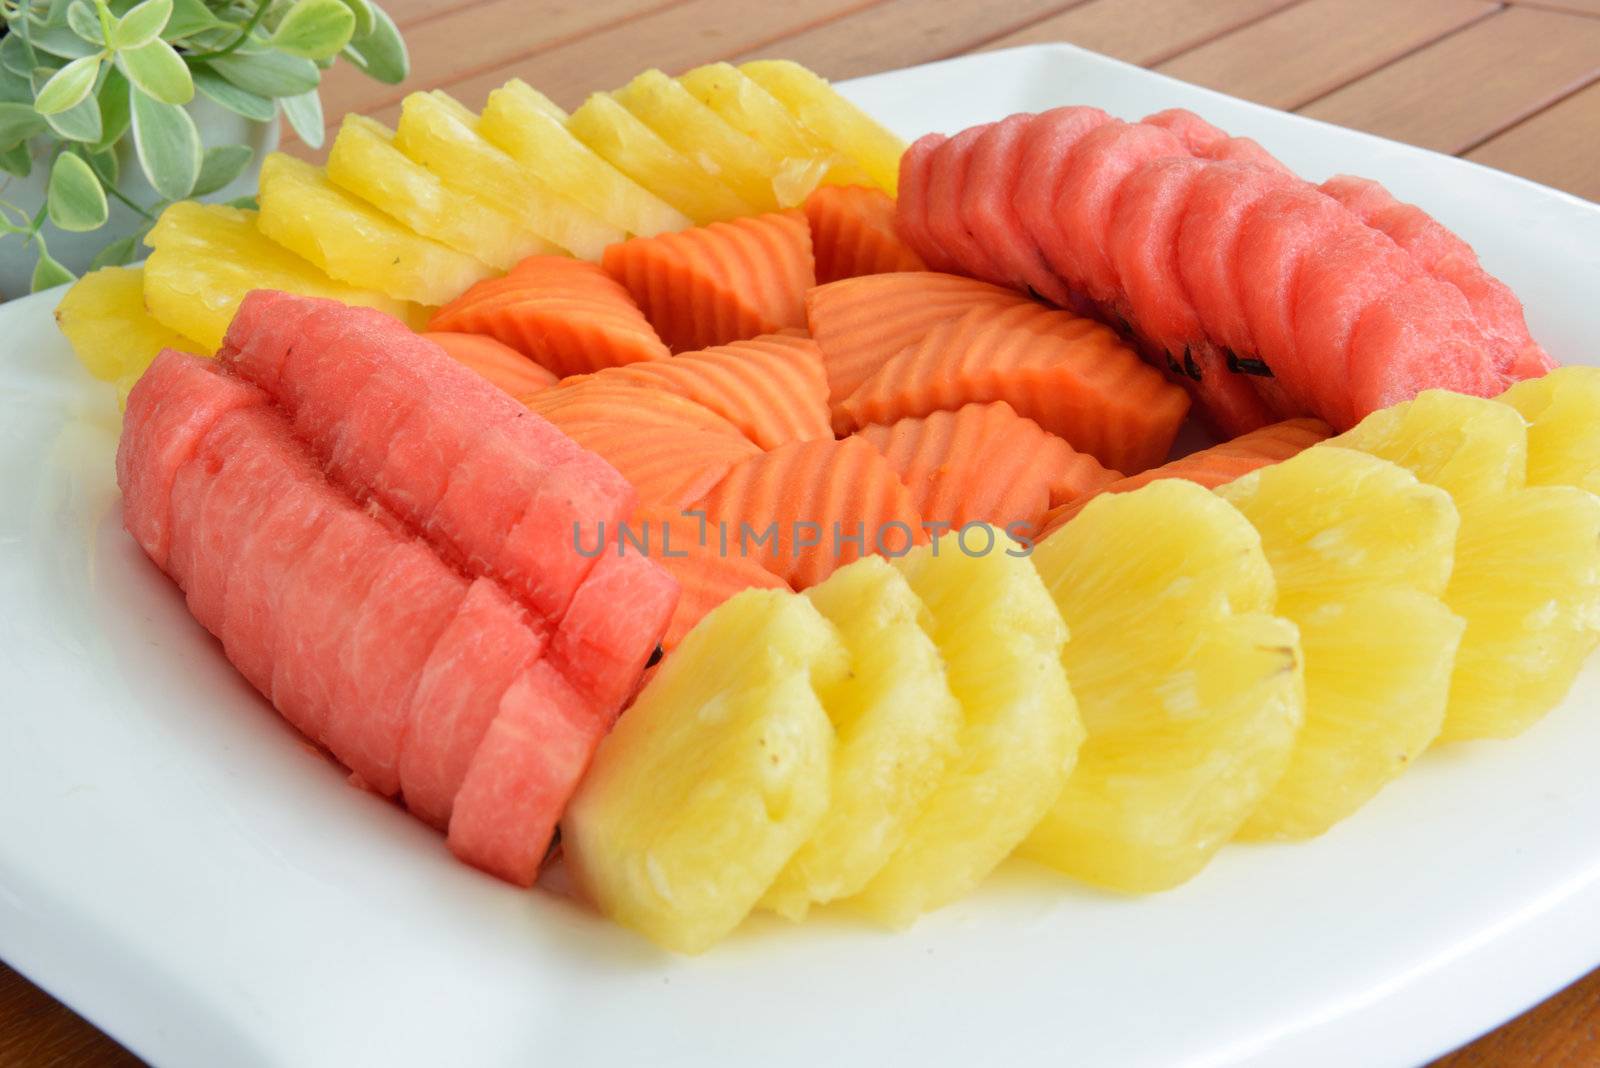 Mixed fruit including papaya, watermelon and pineapple is served on the white plate